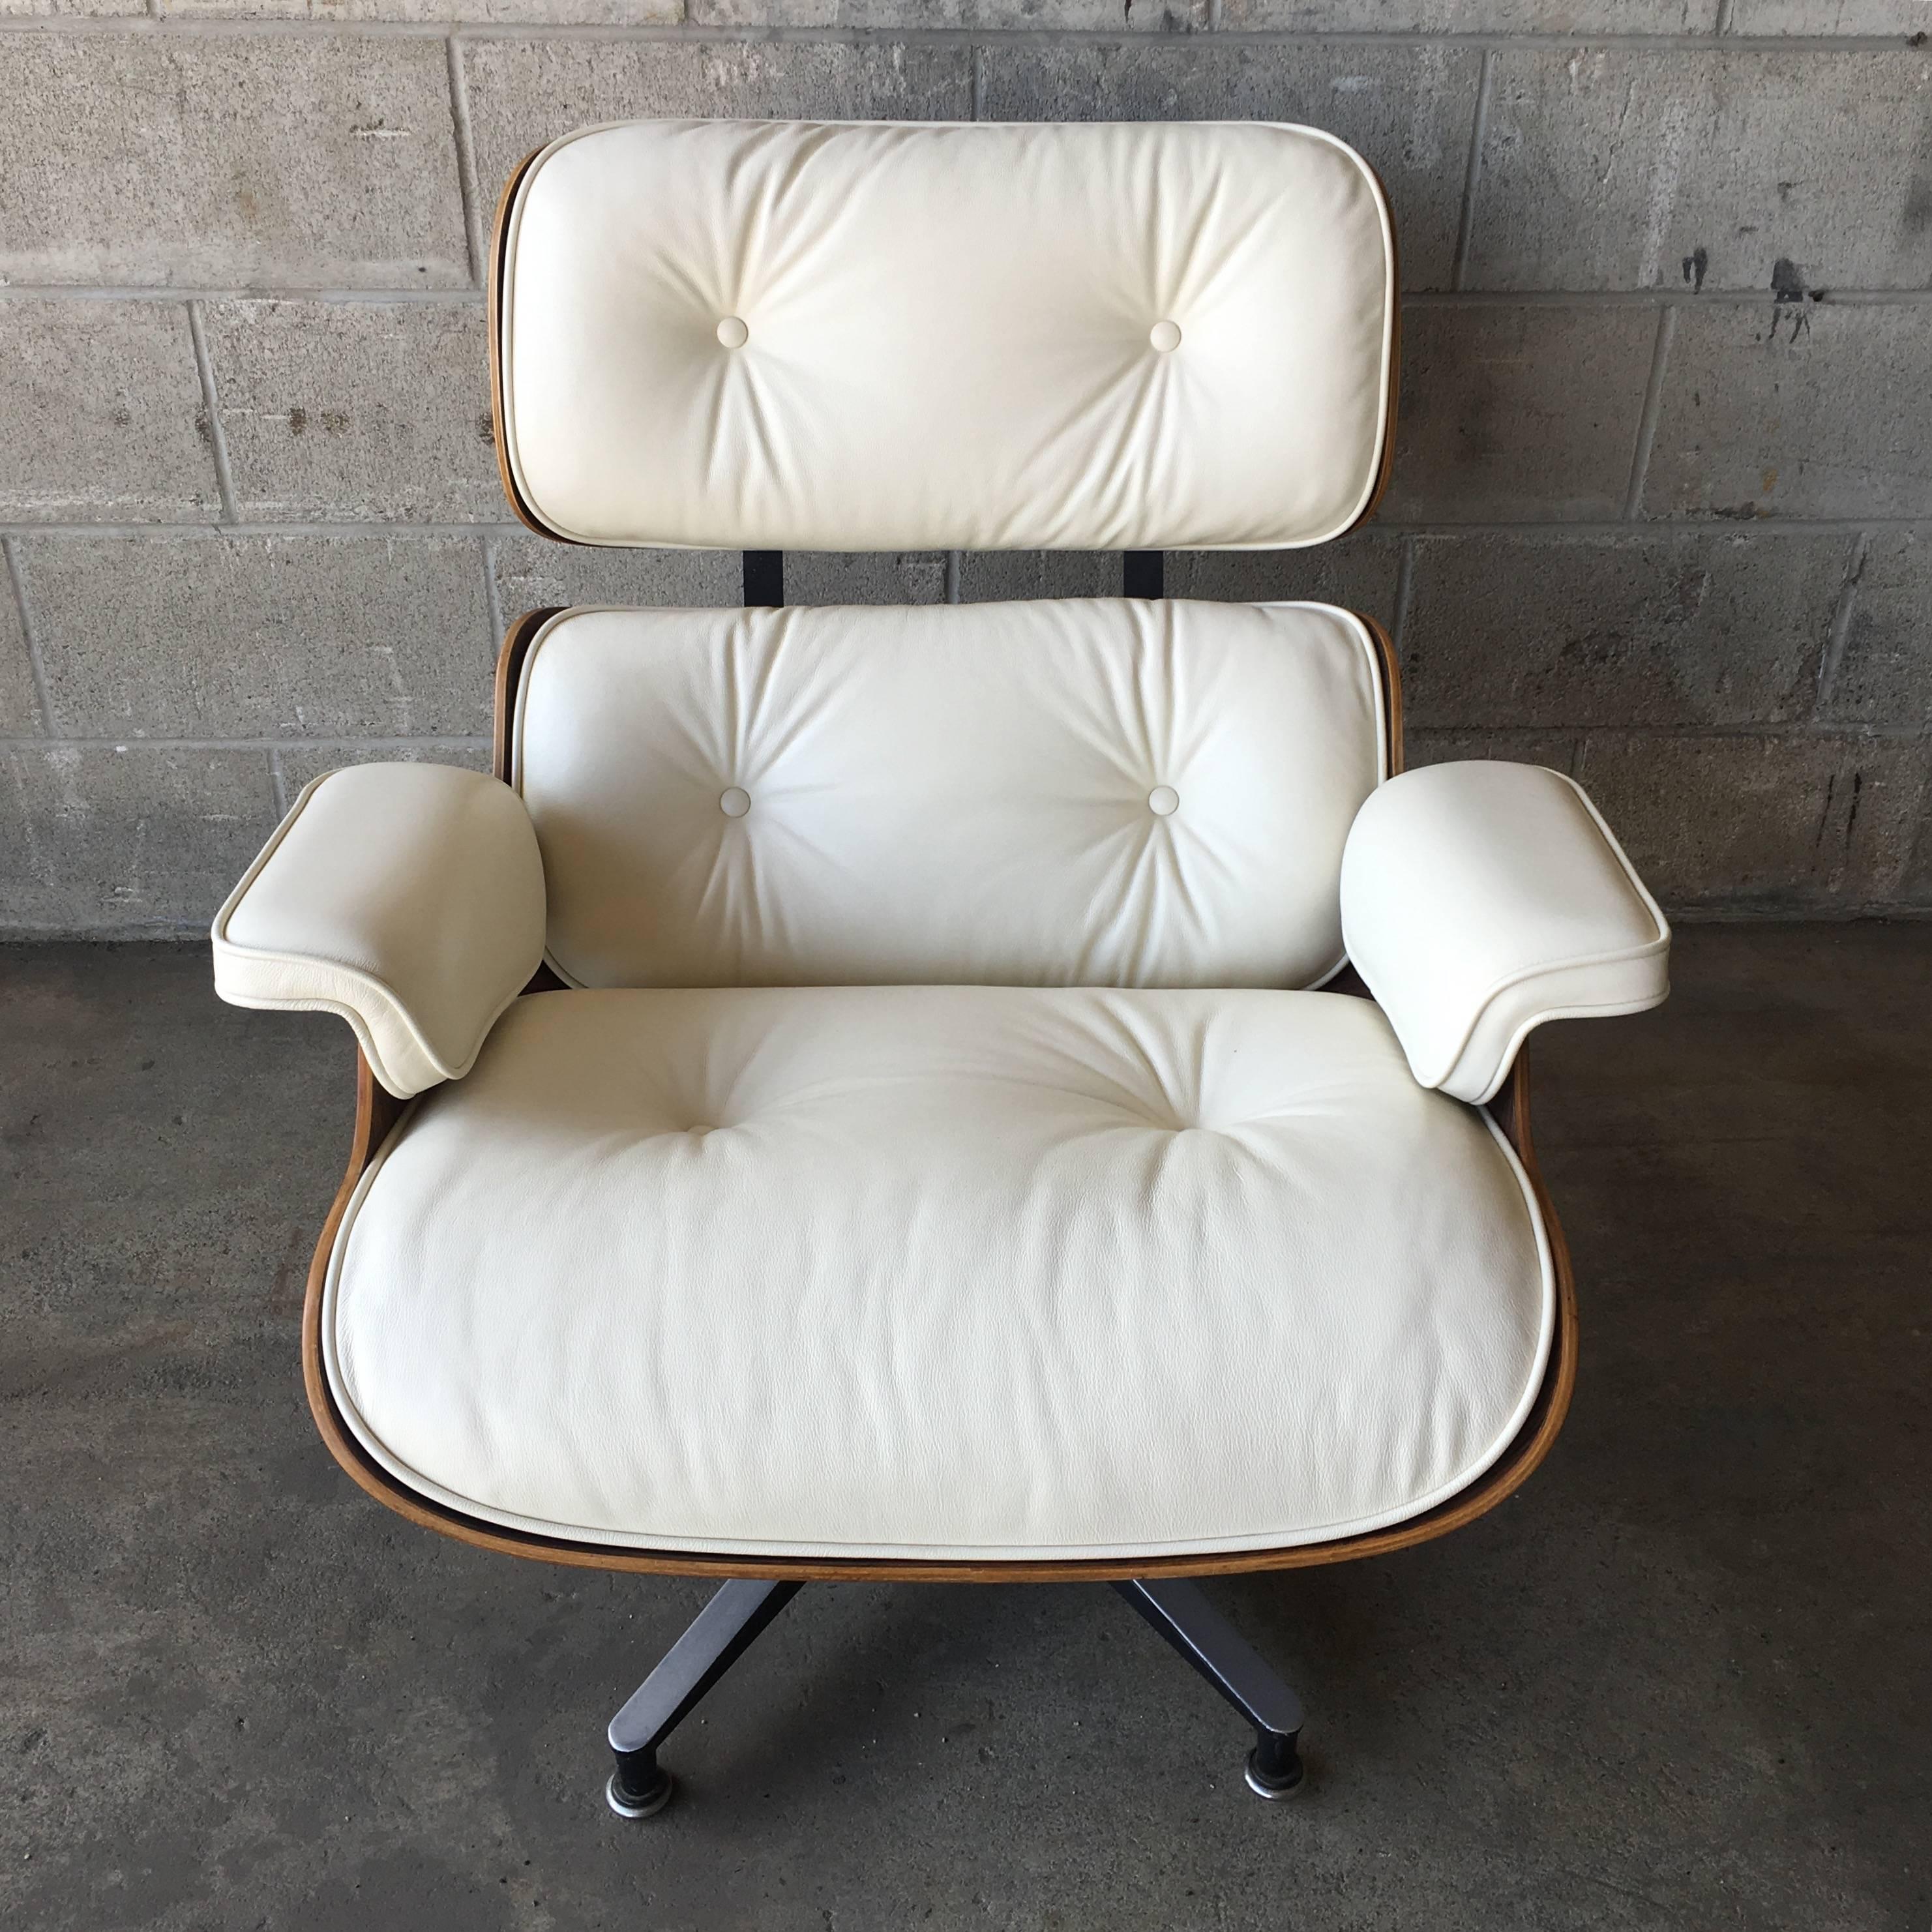 Rose woodHerman Miller Eames lounge chair and new ivory cushions. In perfect condition. Impeccable wood color and grain detail. Ottoman also available.